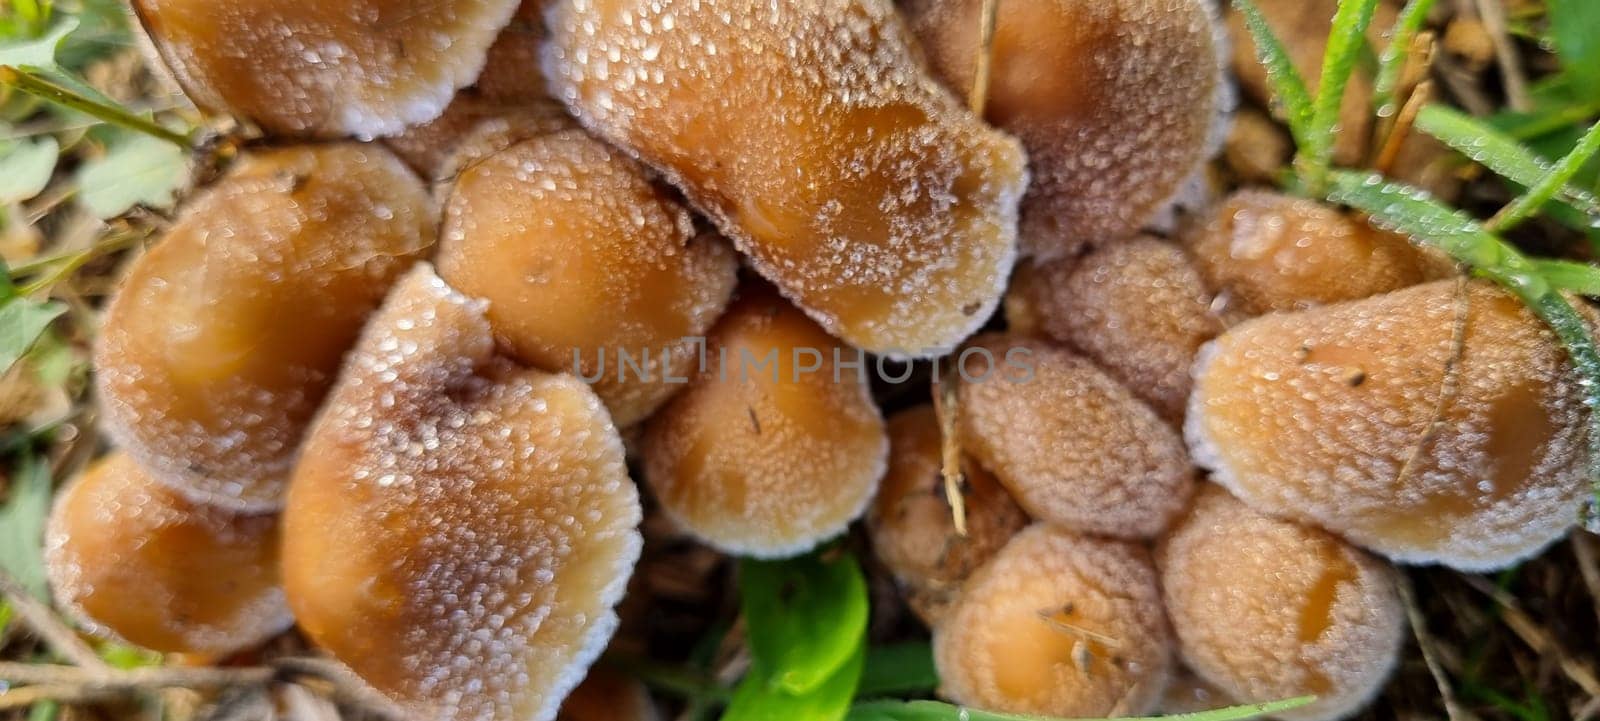 Close-up macro photograph of frost-covered wild mushrooms in their natural woodland environment